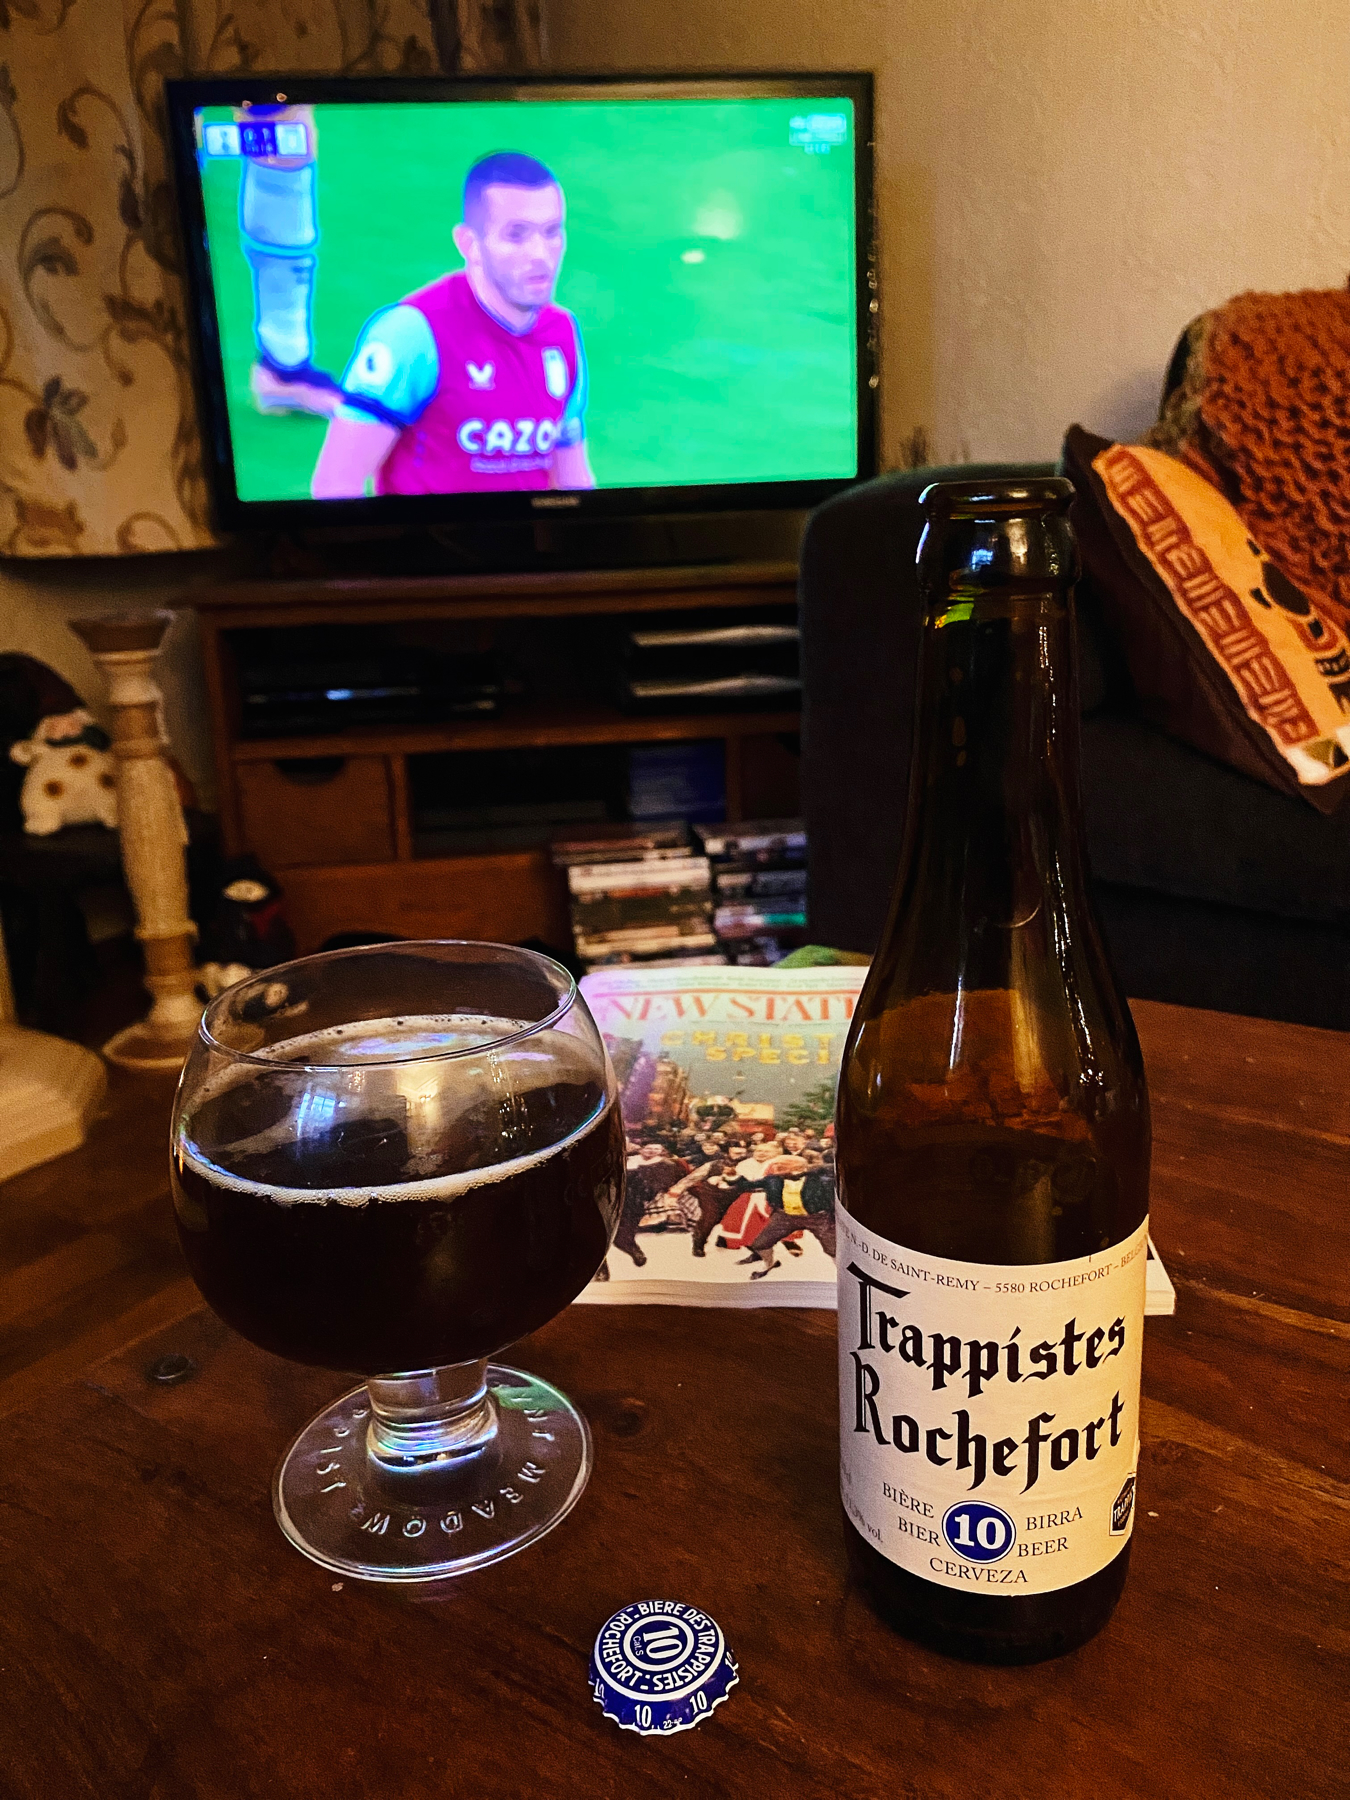 Bottle and glass of dark Belgian beer, football match on TV in the background